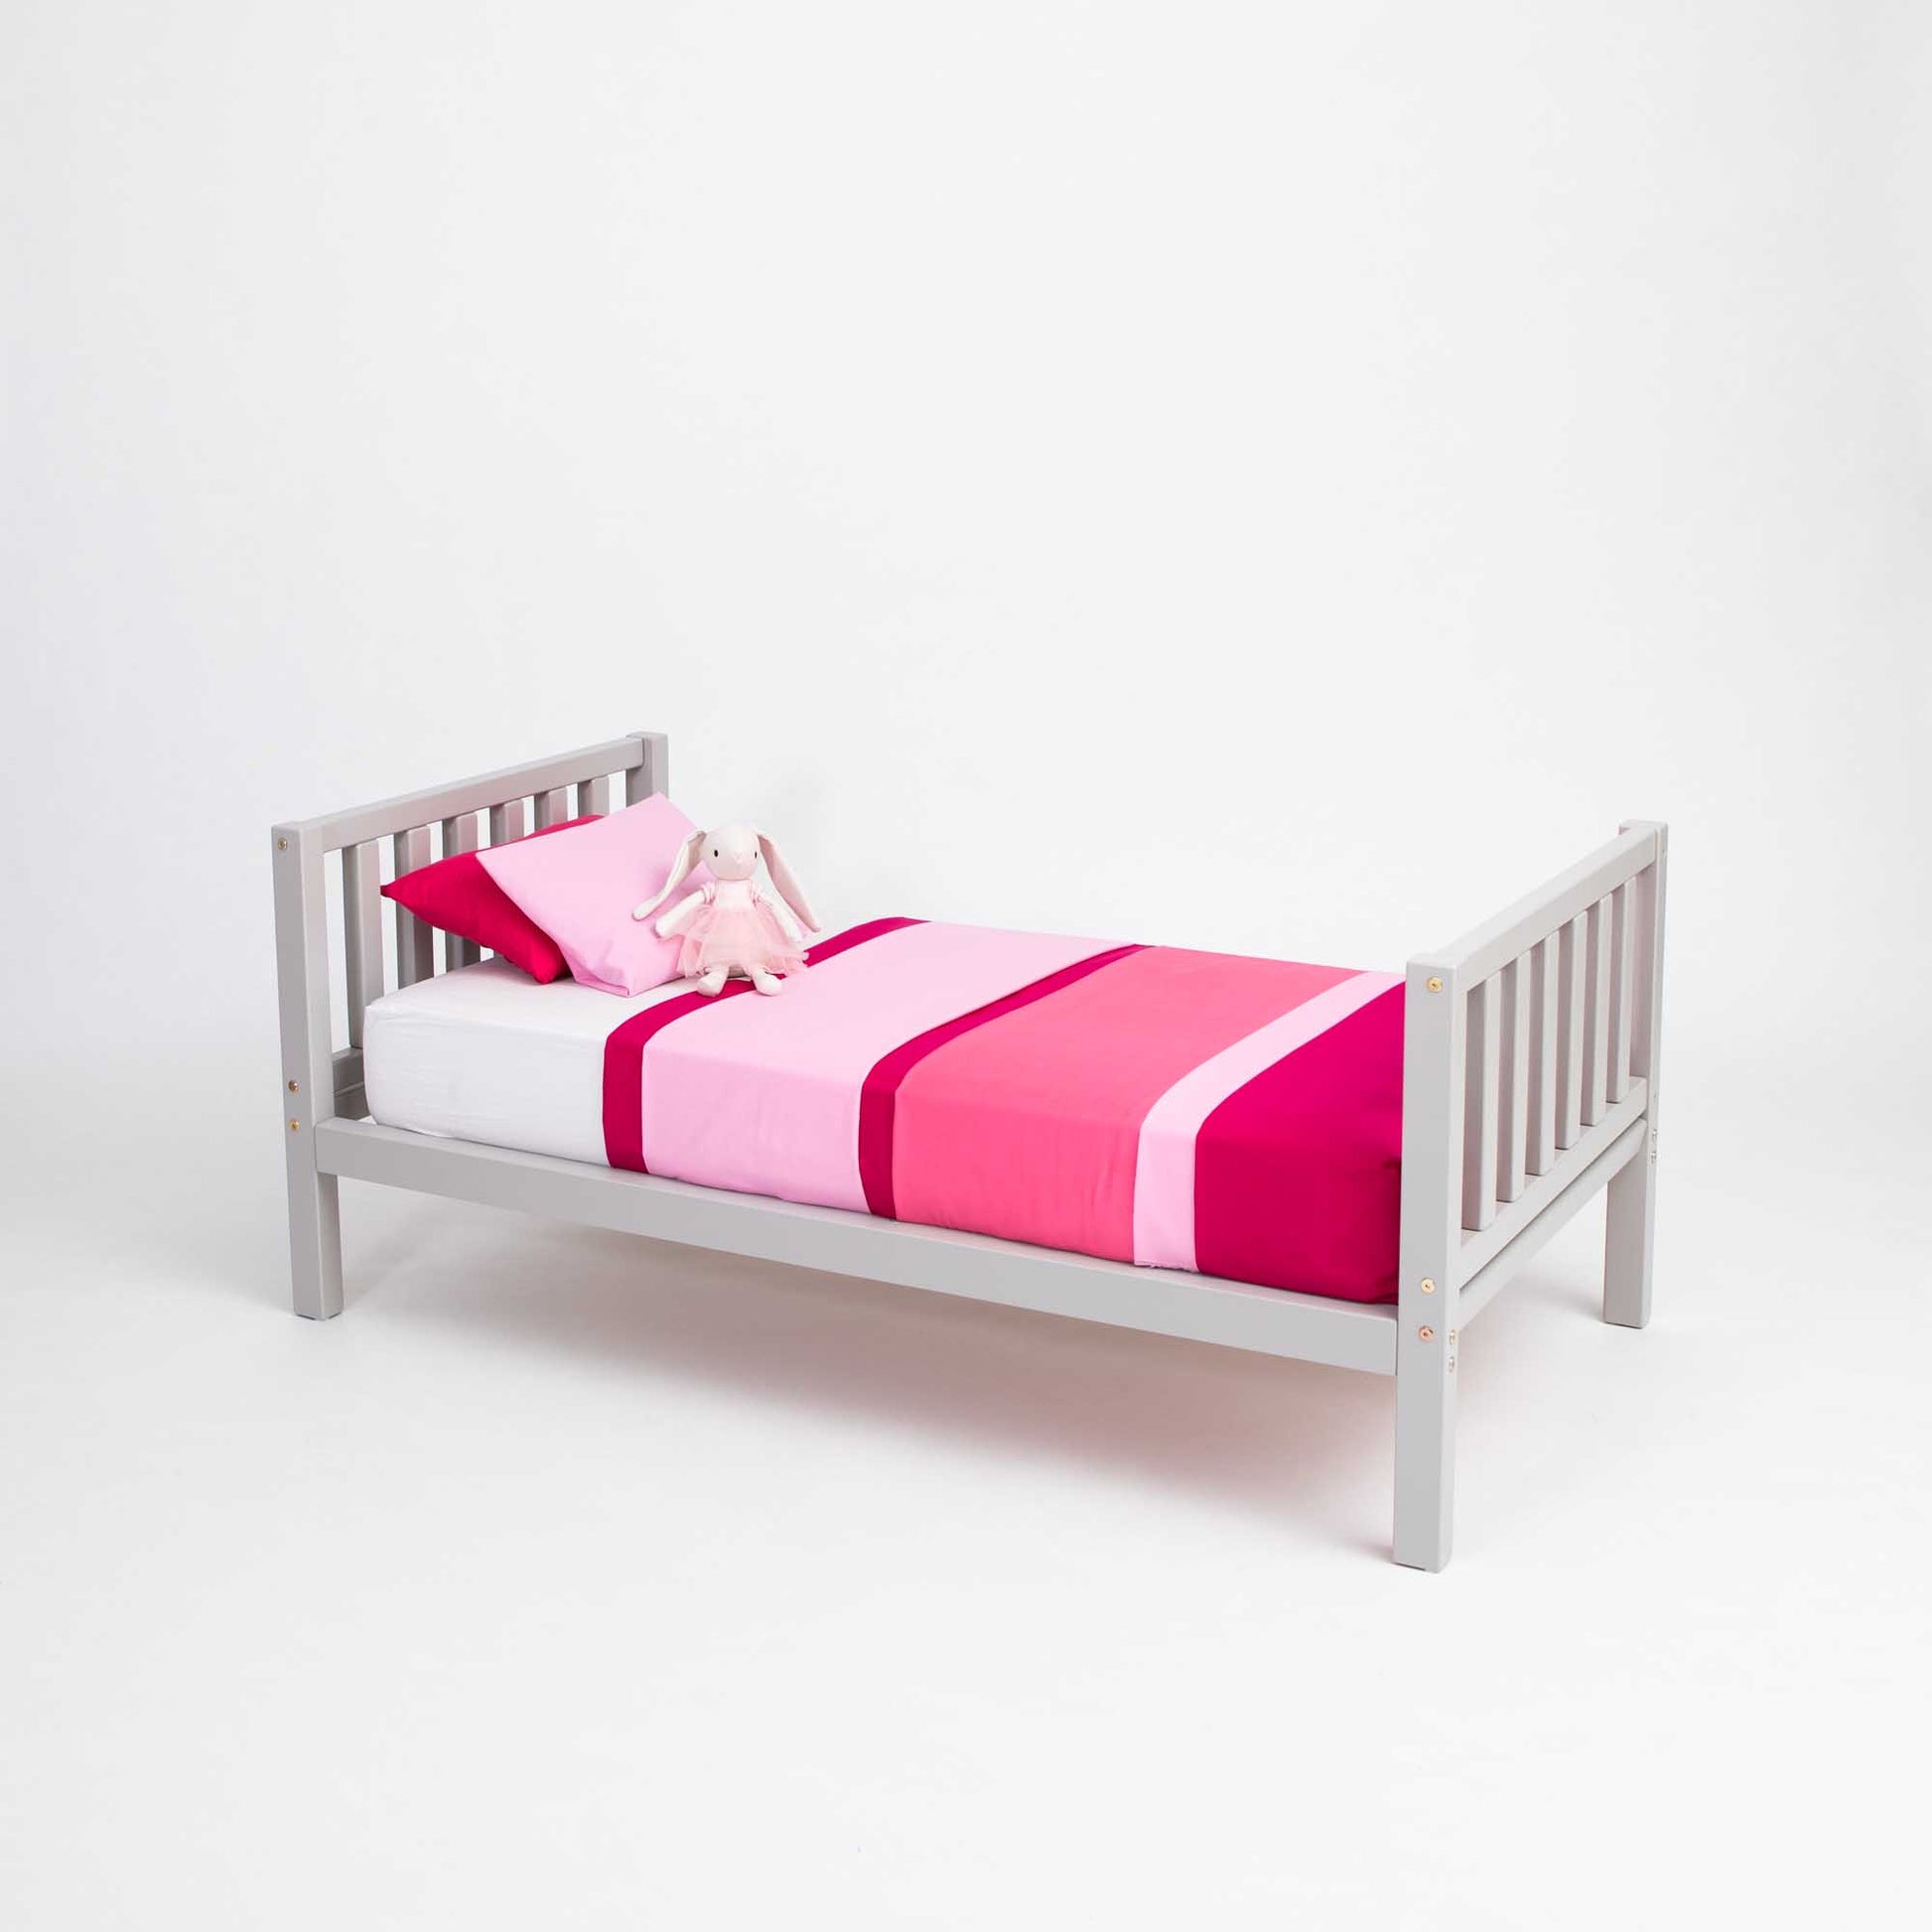 A Sweet Home From Wood raised kids' bed on legs with a headboard and footboard, with pink and white bedding, promoting independence.